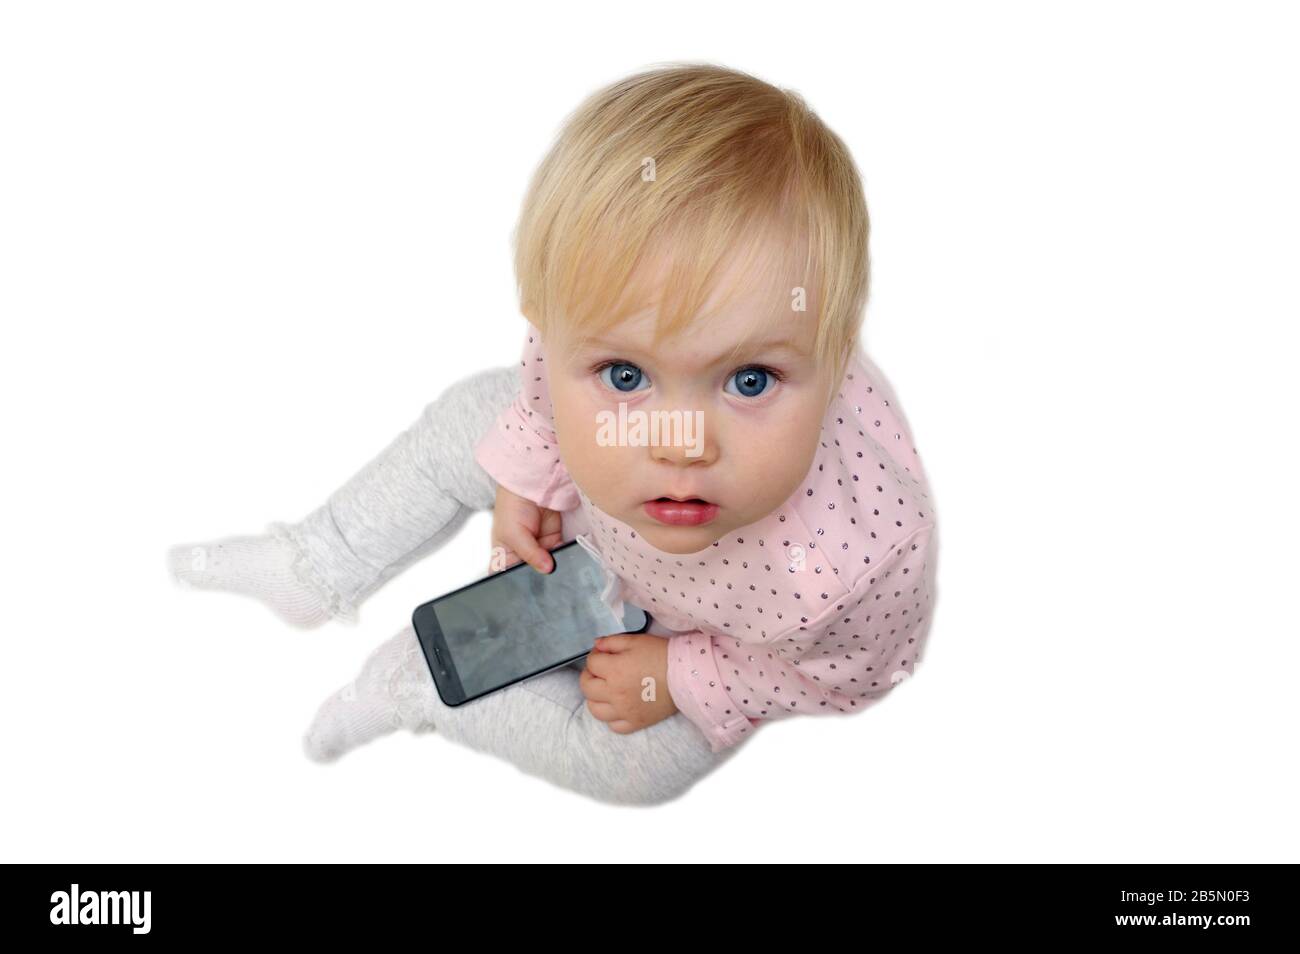 child is holding a cell phone Stock Photo